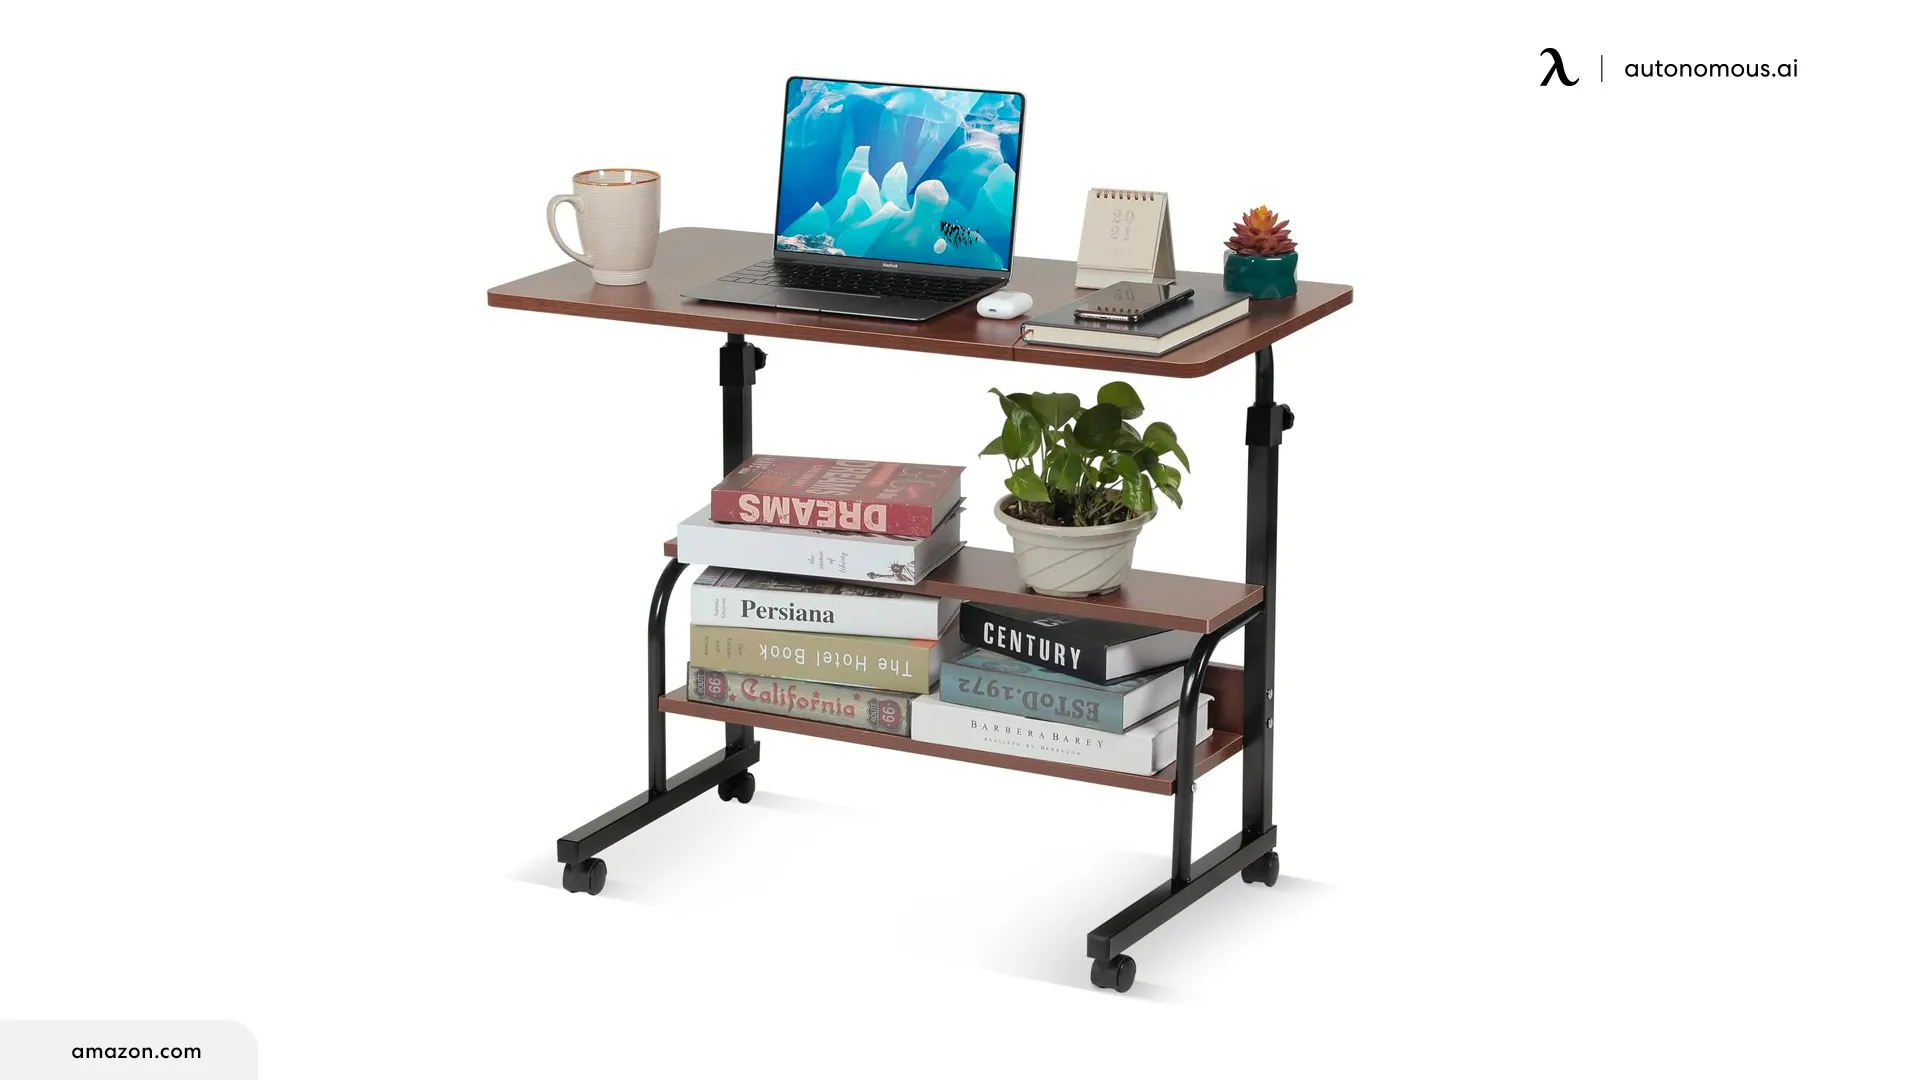 Benefits of Incorporating Storage into Your Workspace